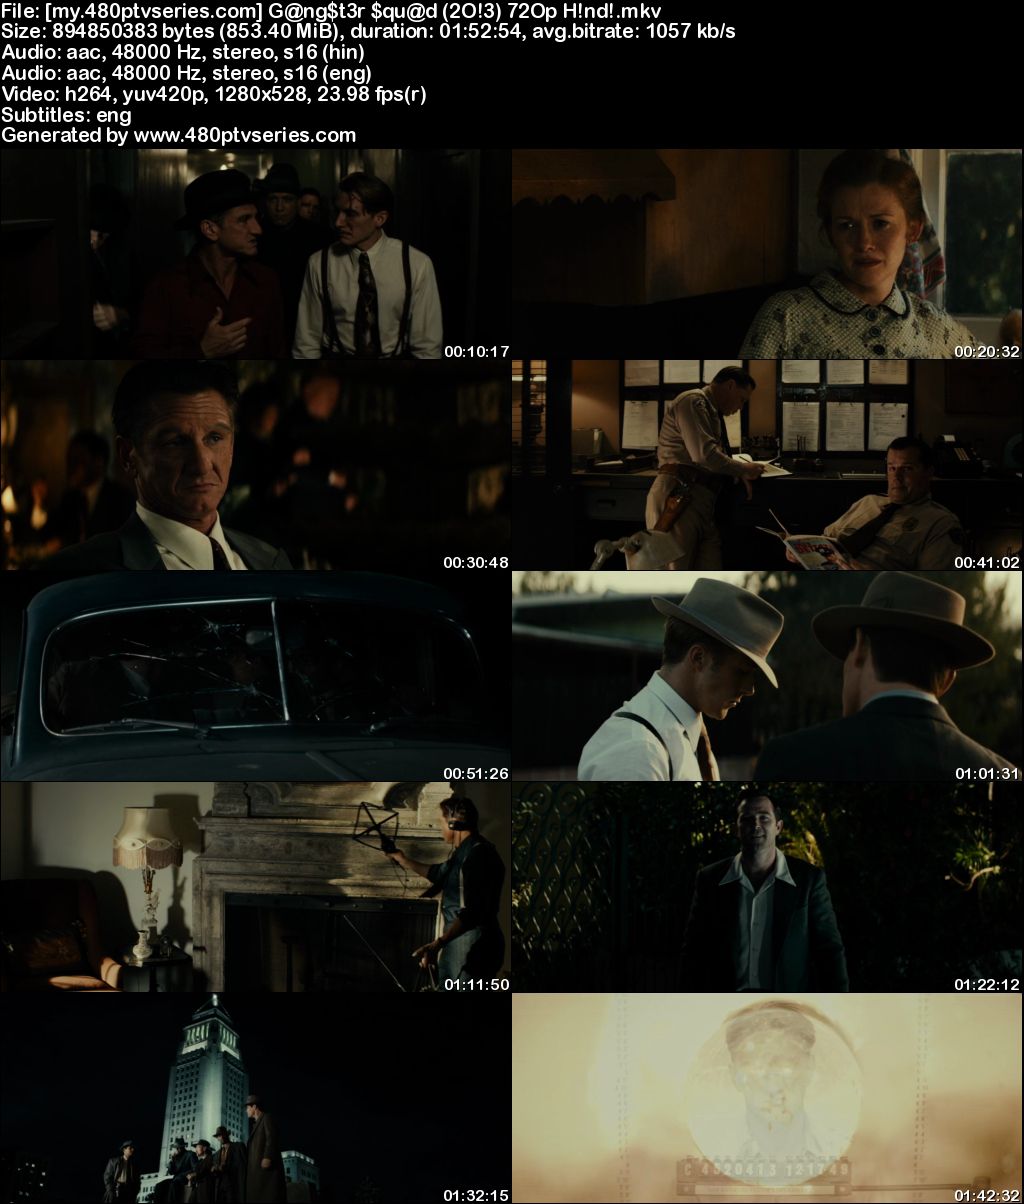 Watch Online Free Gangster Squad (2013) Full Hindi Dual Audio Movie Download 480p 720p Bluray